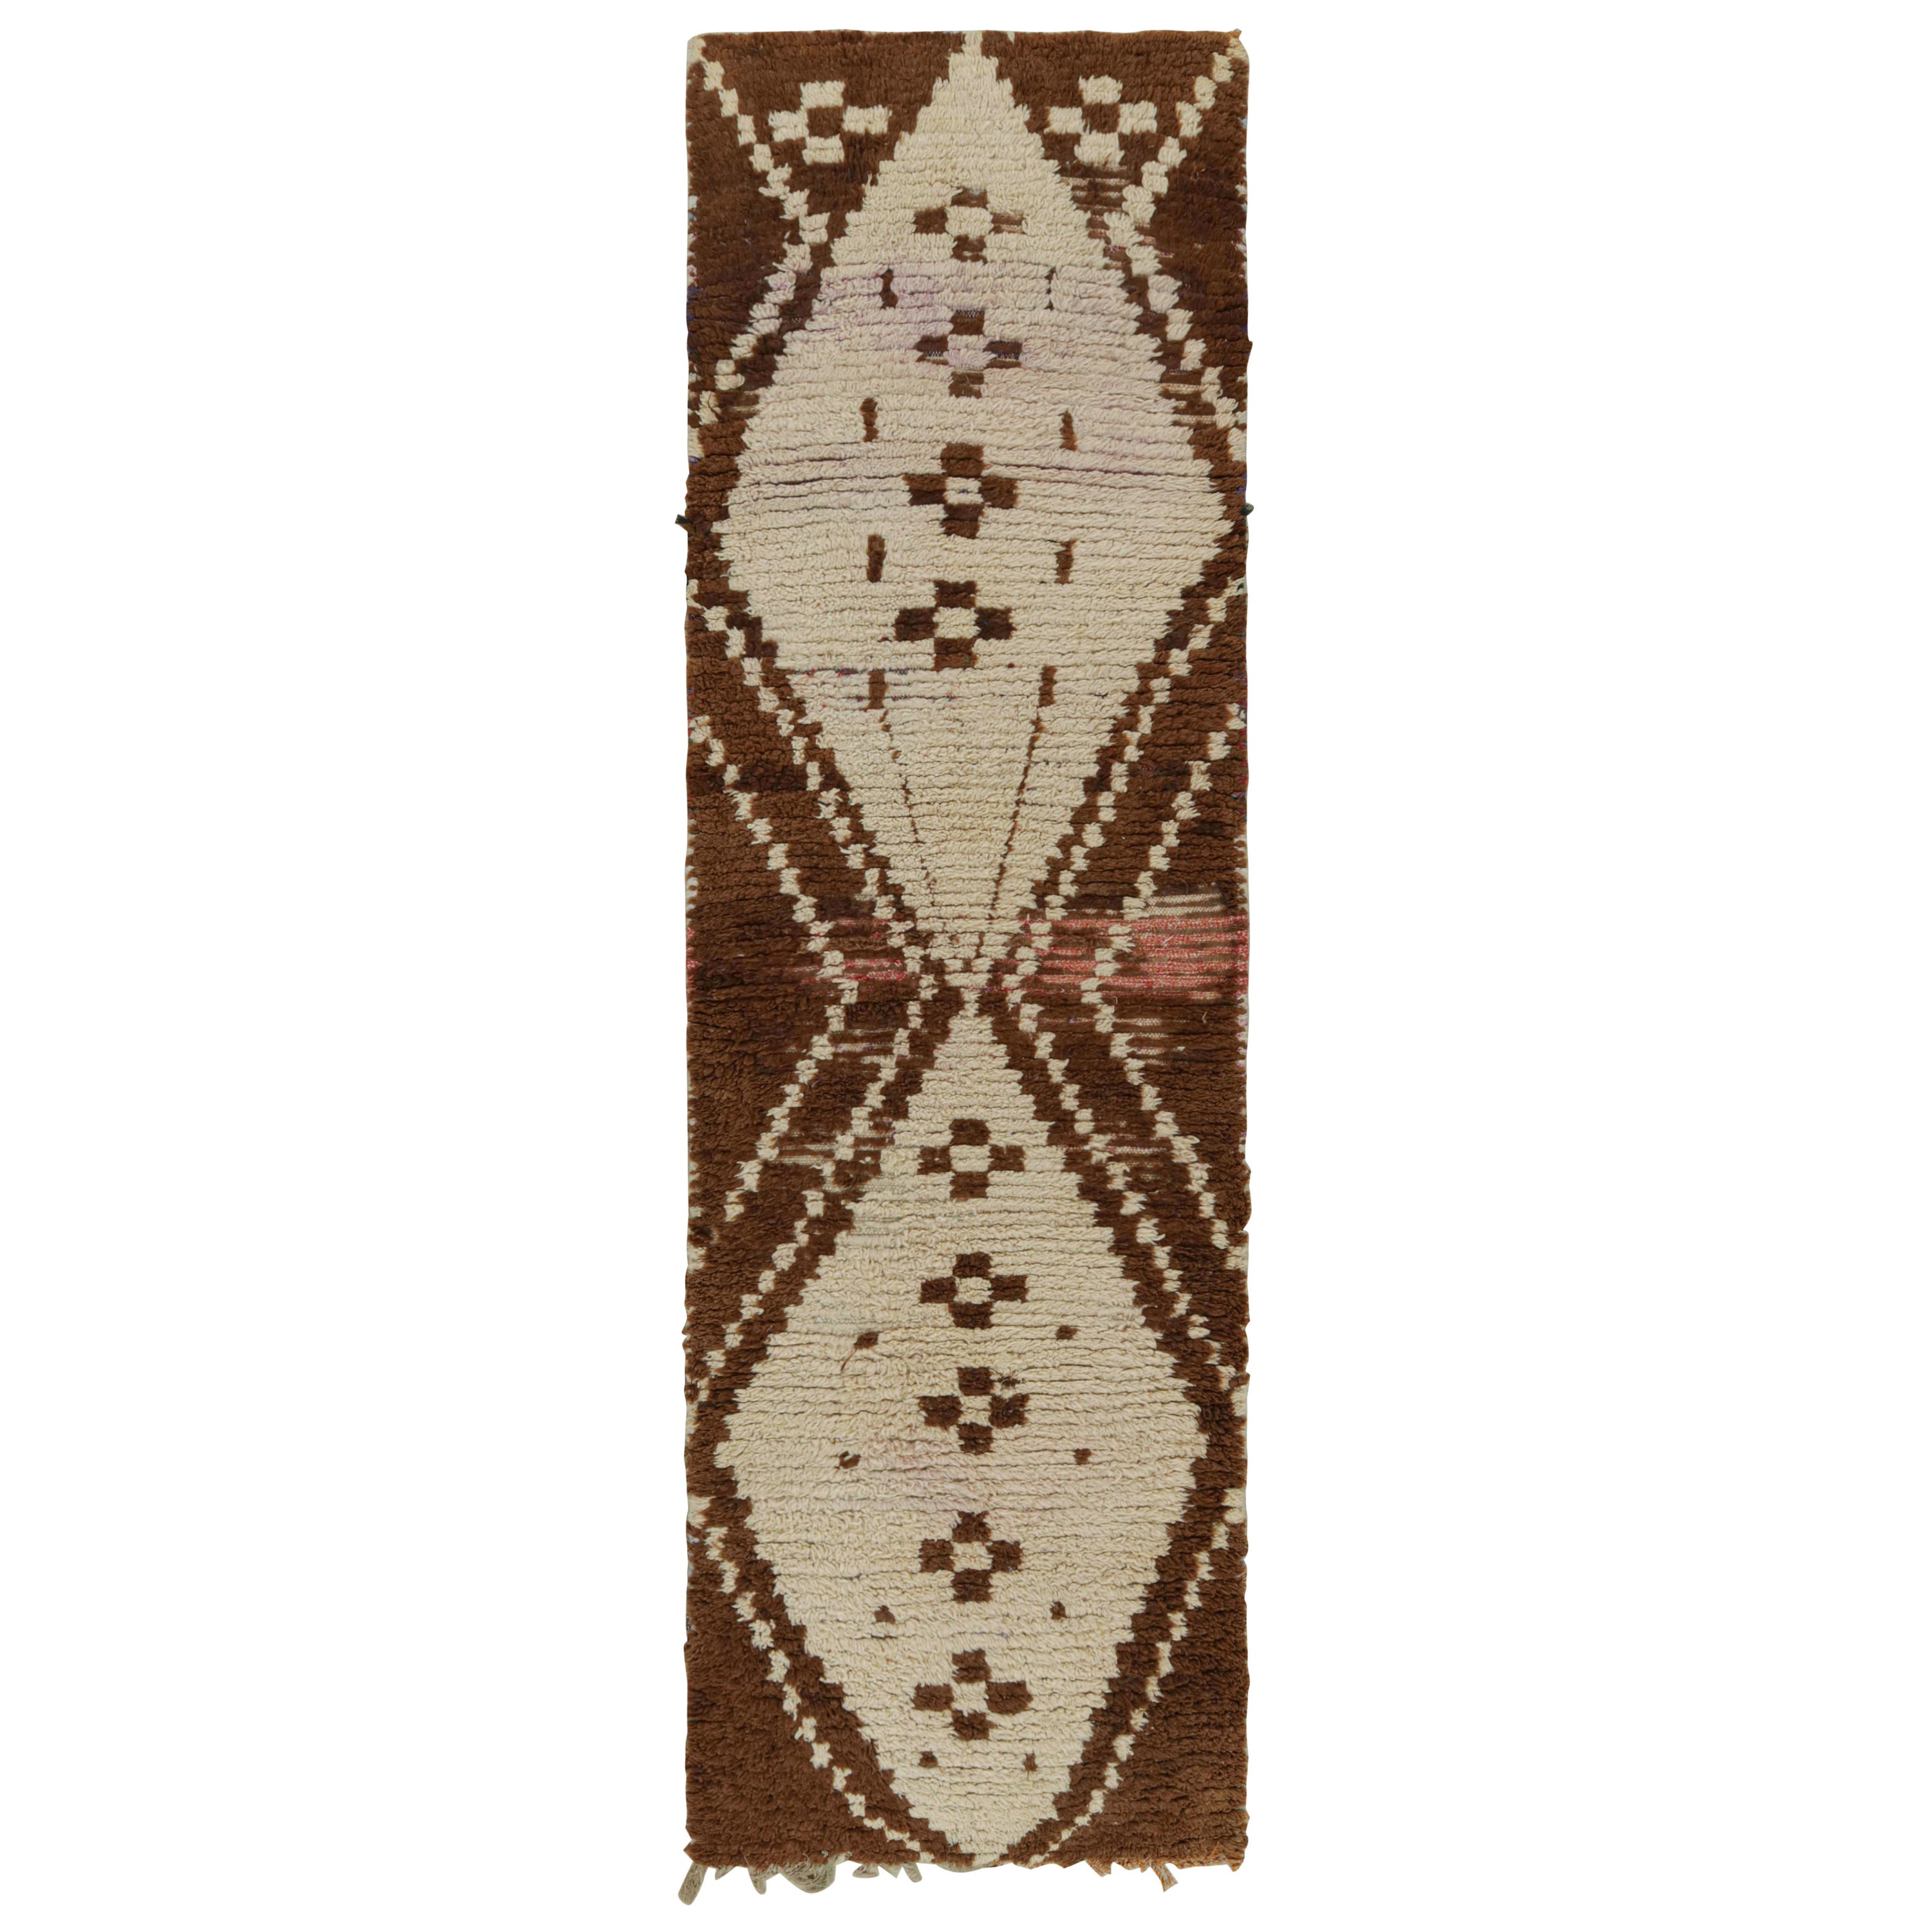 1950s Azilal Moroccan runner rug in Beige-Brown Tribal Patterns by Rug & Kilim For Sale